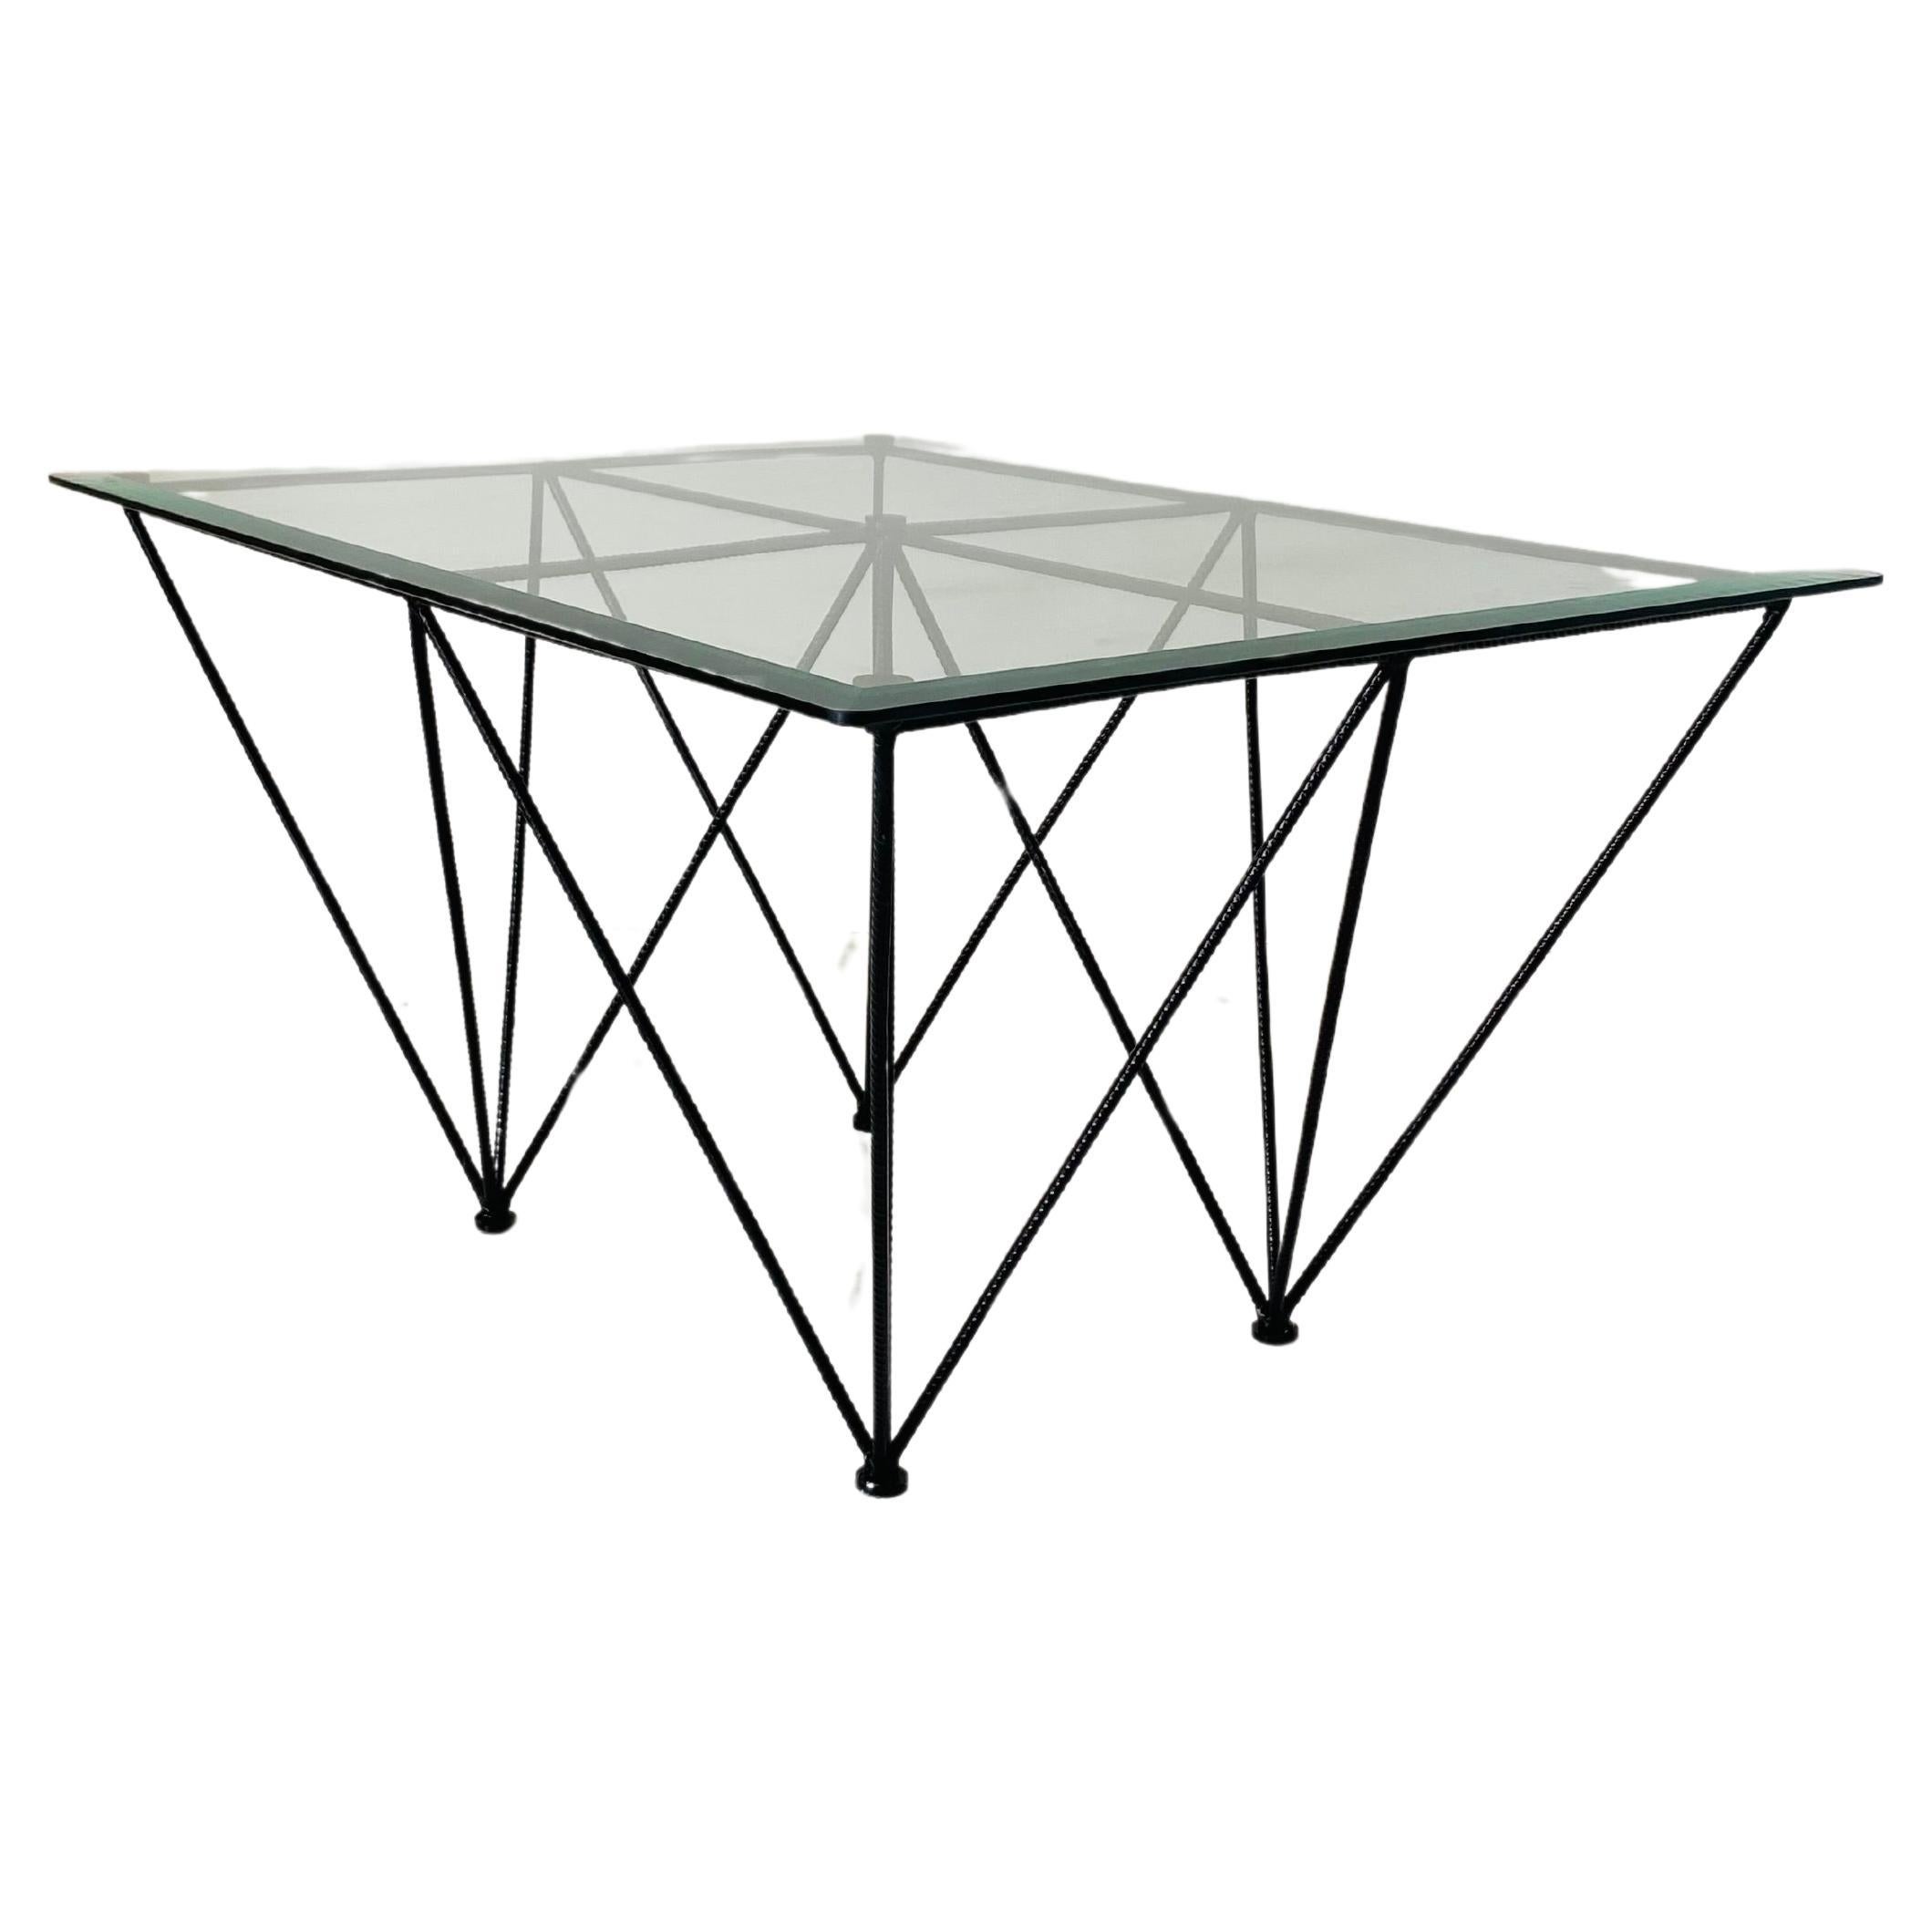 1970s Industrial coffee table manufactured in Italy. Cut transparent glass top and industrial steel frame. In very good conditions with no damages.

Please visit our profile page to check our constantly updated 200+ original vintage collection (and